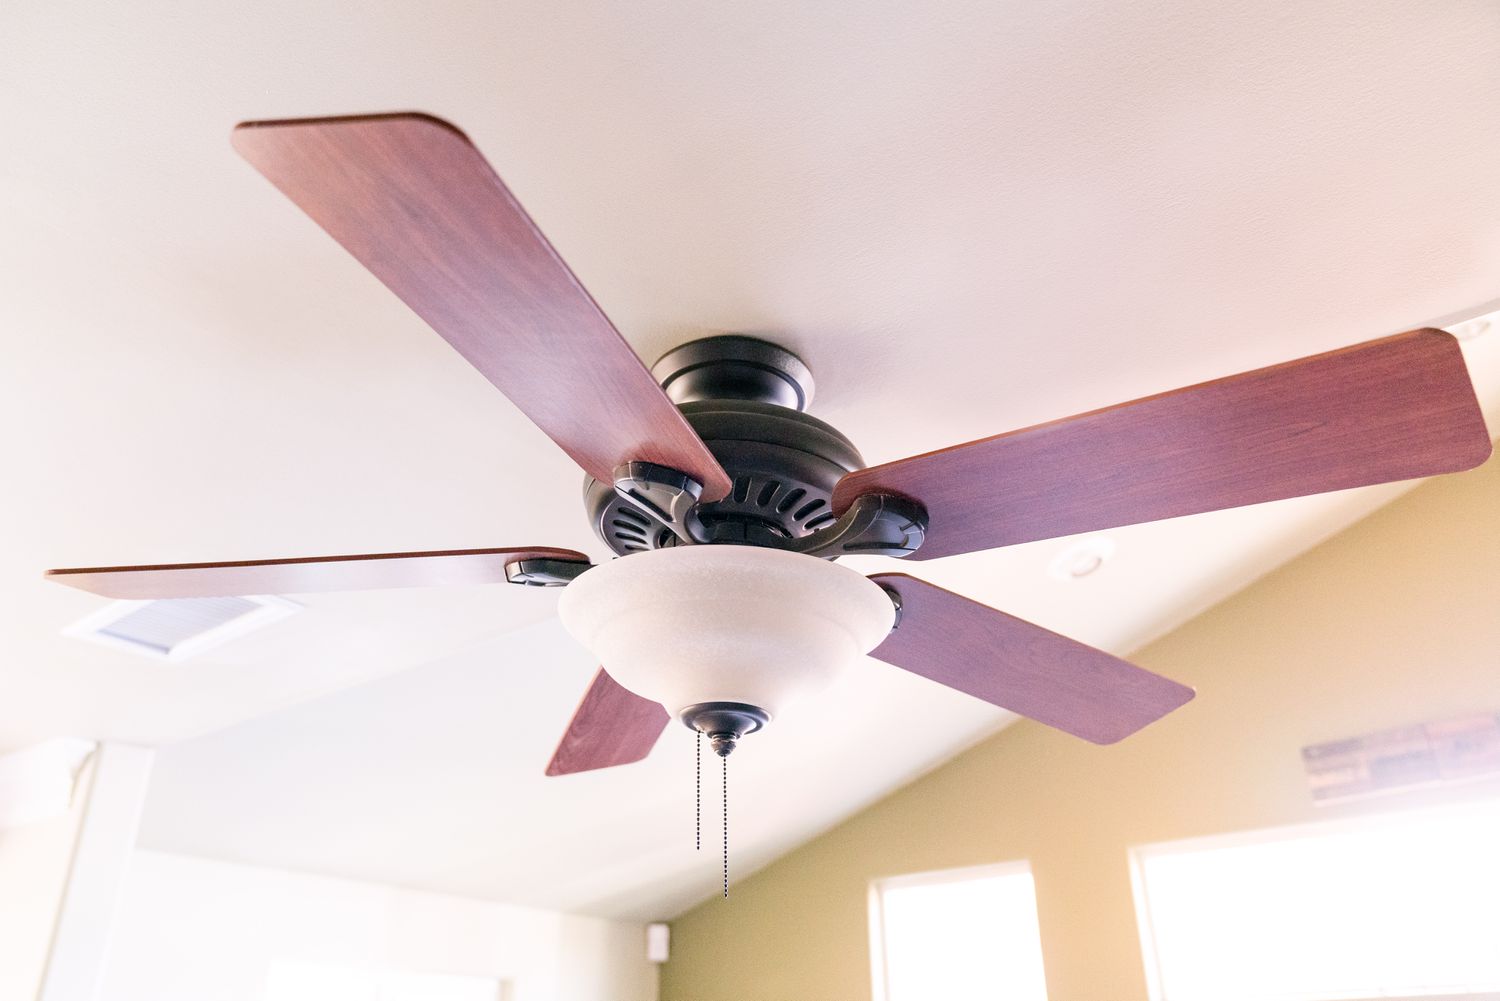 Why Do Ceiling Fans Make Noise